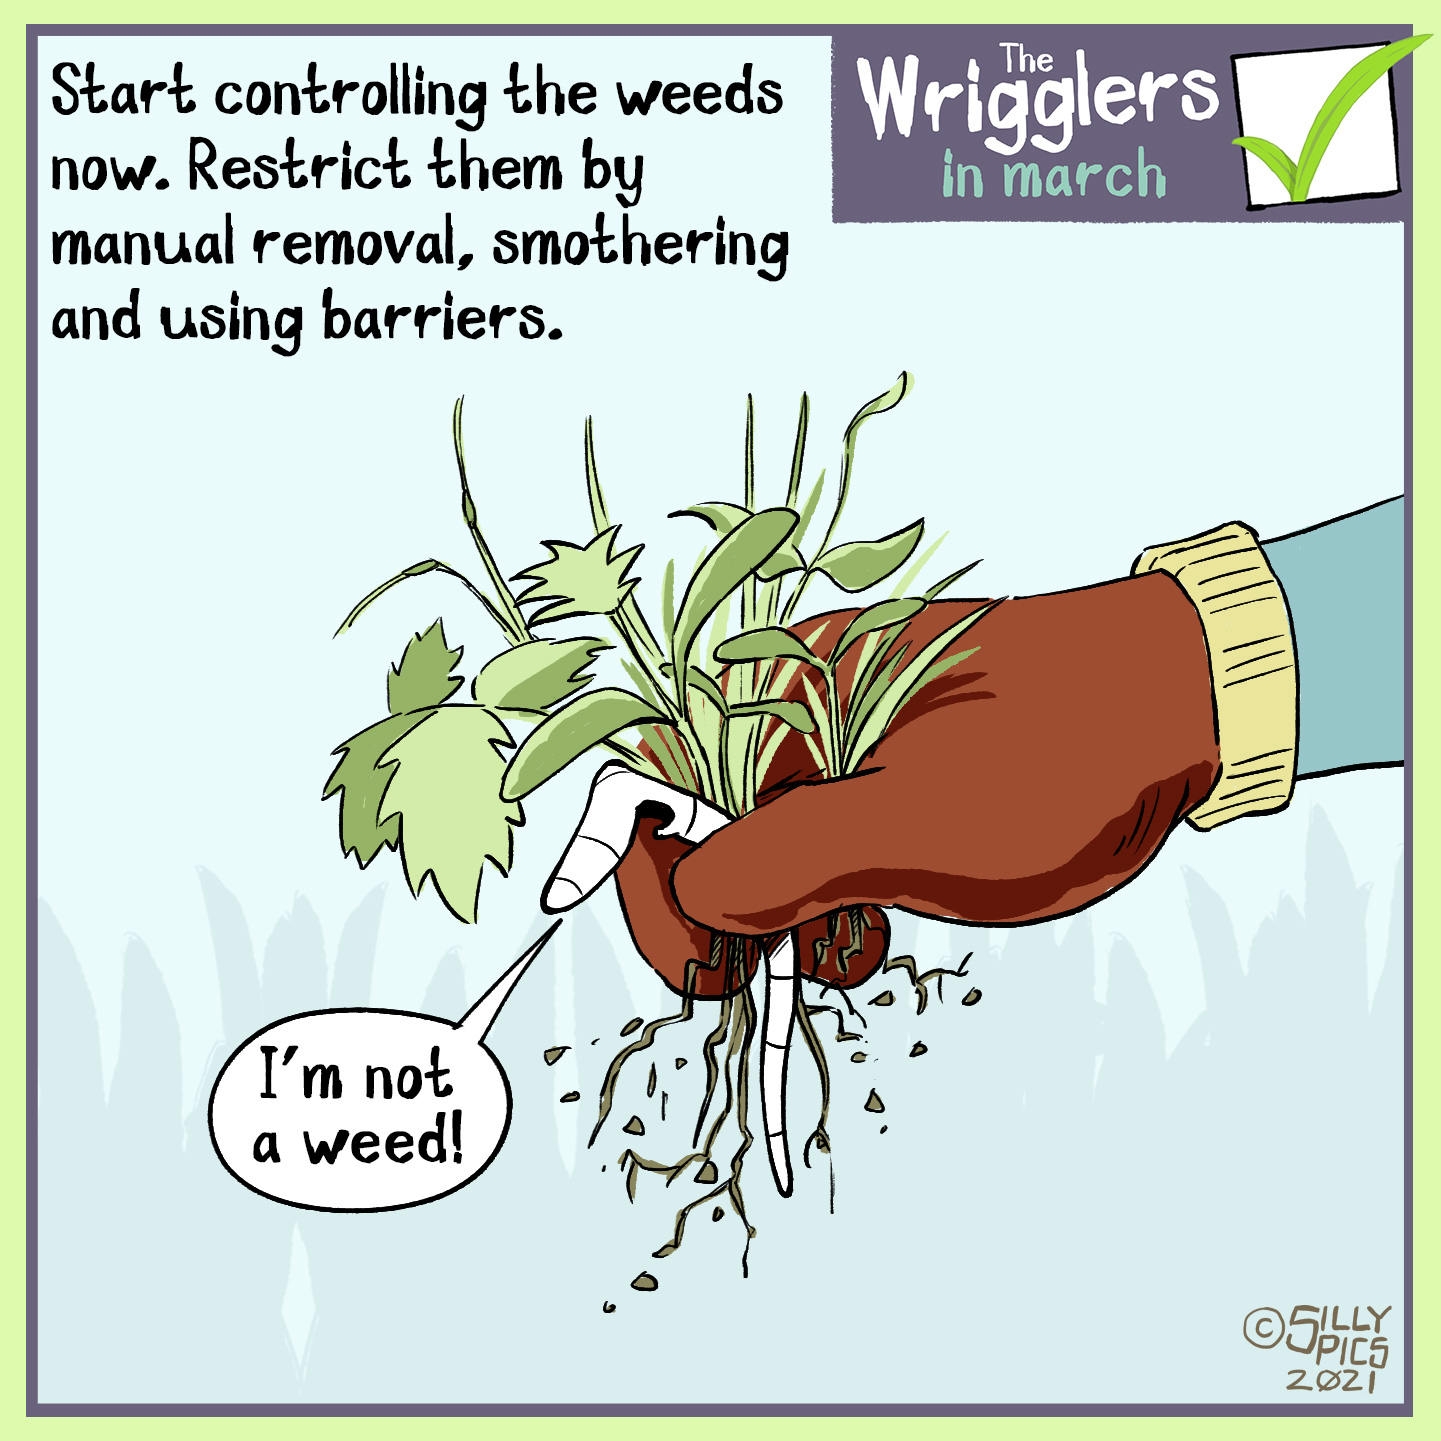 March is the time to start controlling your weeds. This cartoon tells you that you can contro them by picking weeds or supressing them with sheets. The image is aof a worm being picked up wiuth a weed by a rubber gloved hand. The worm says, I am not a weed